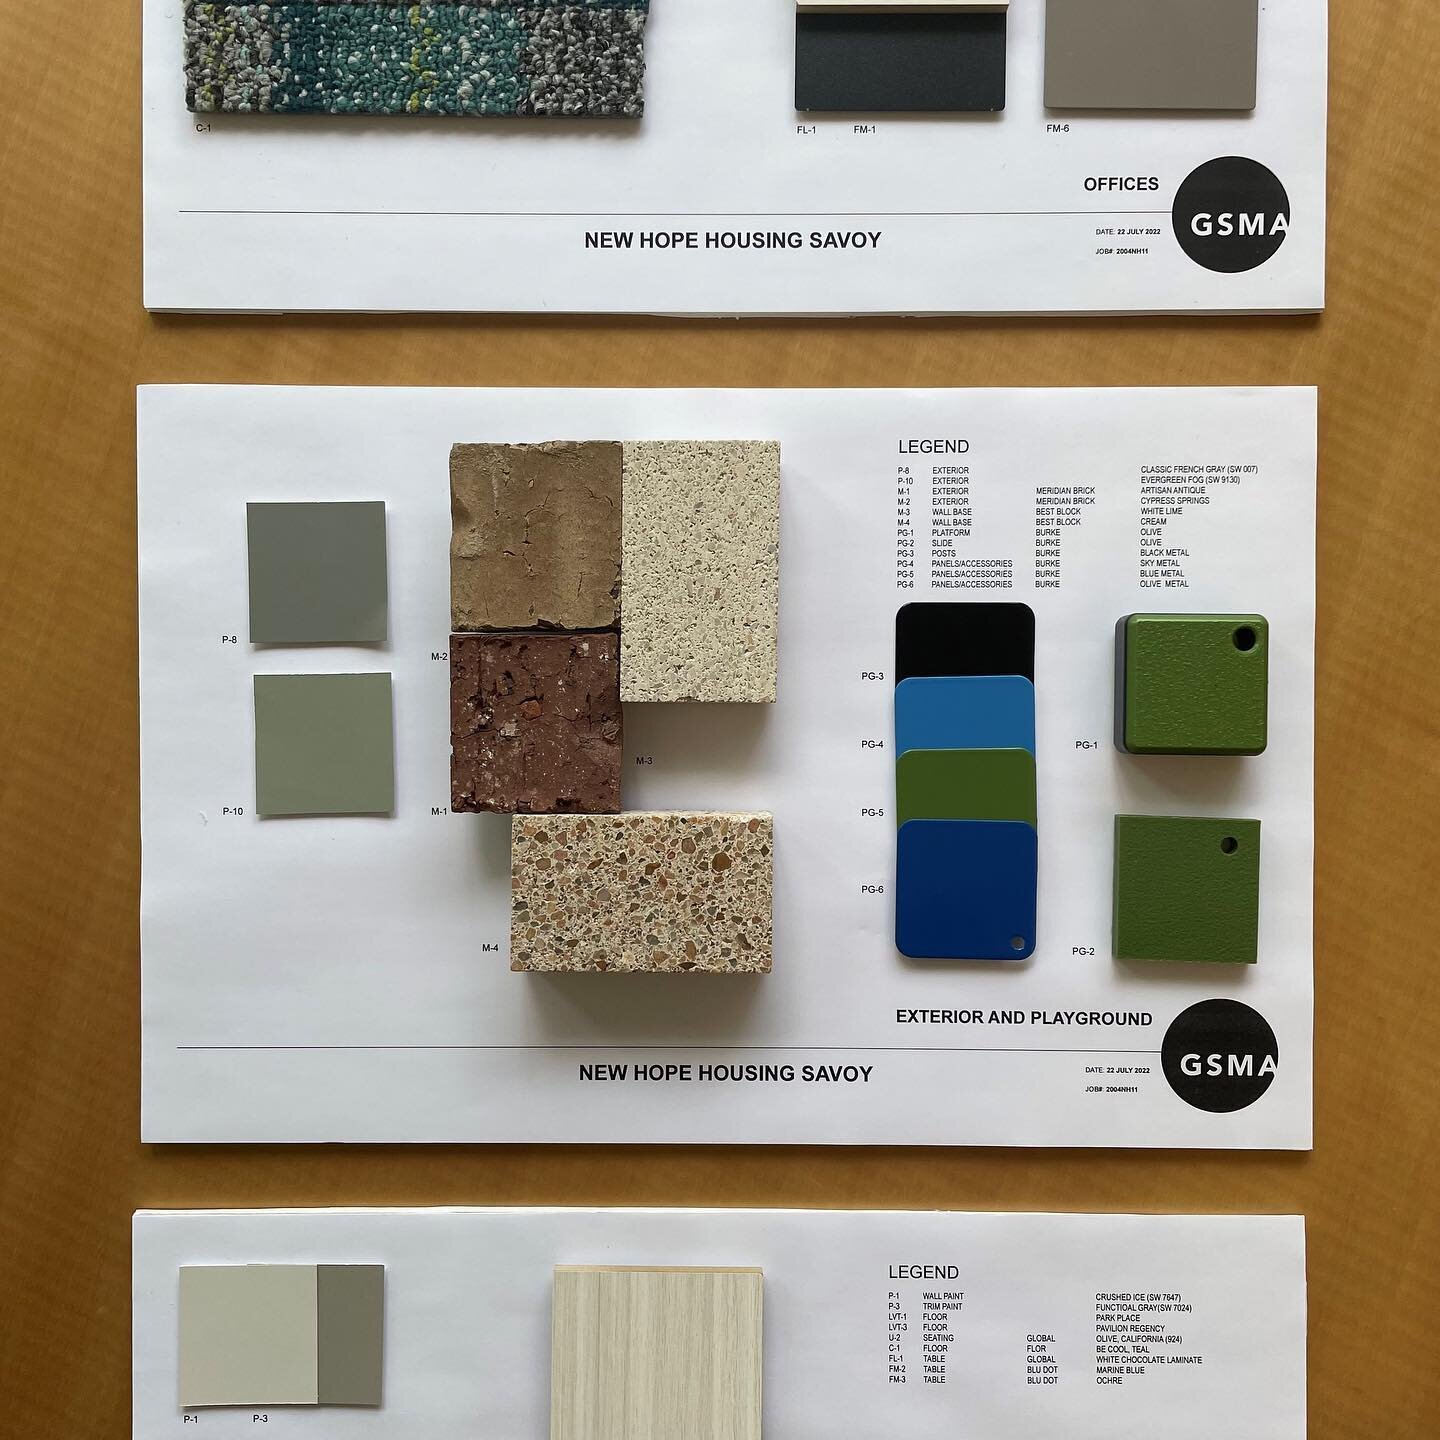 Project material selections going from sample boards to site mock up. Enjoying the process every step of the way.